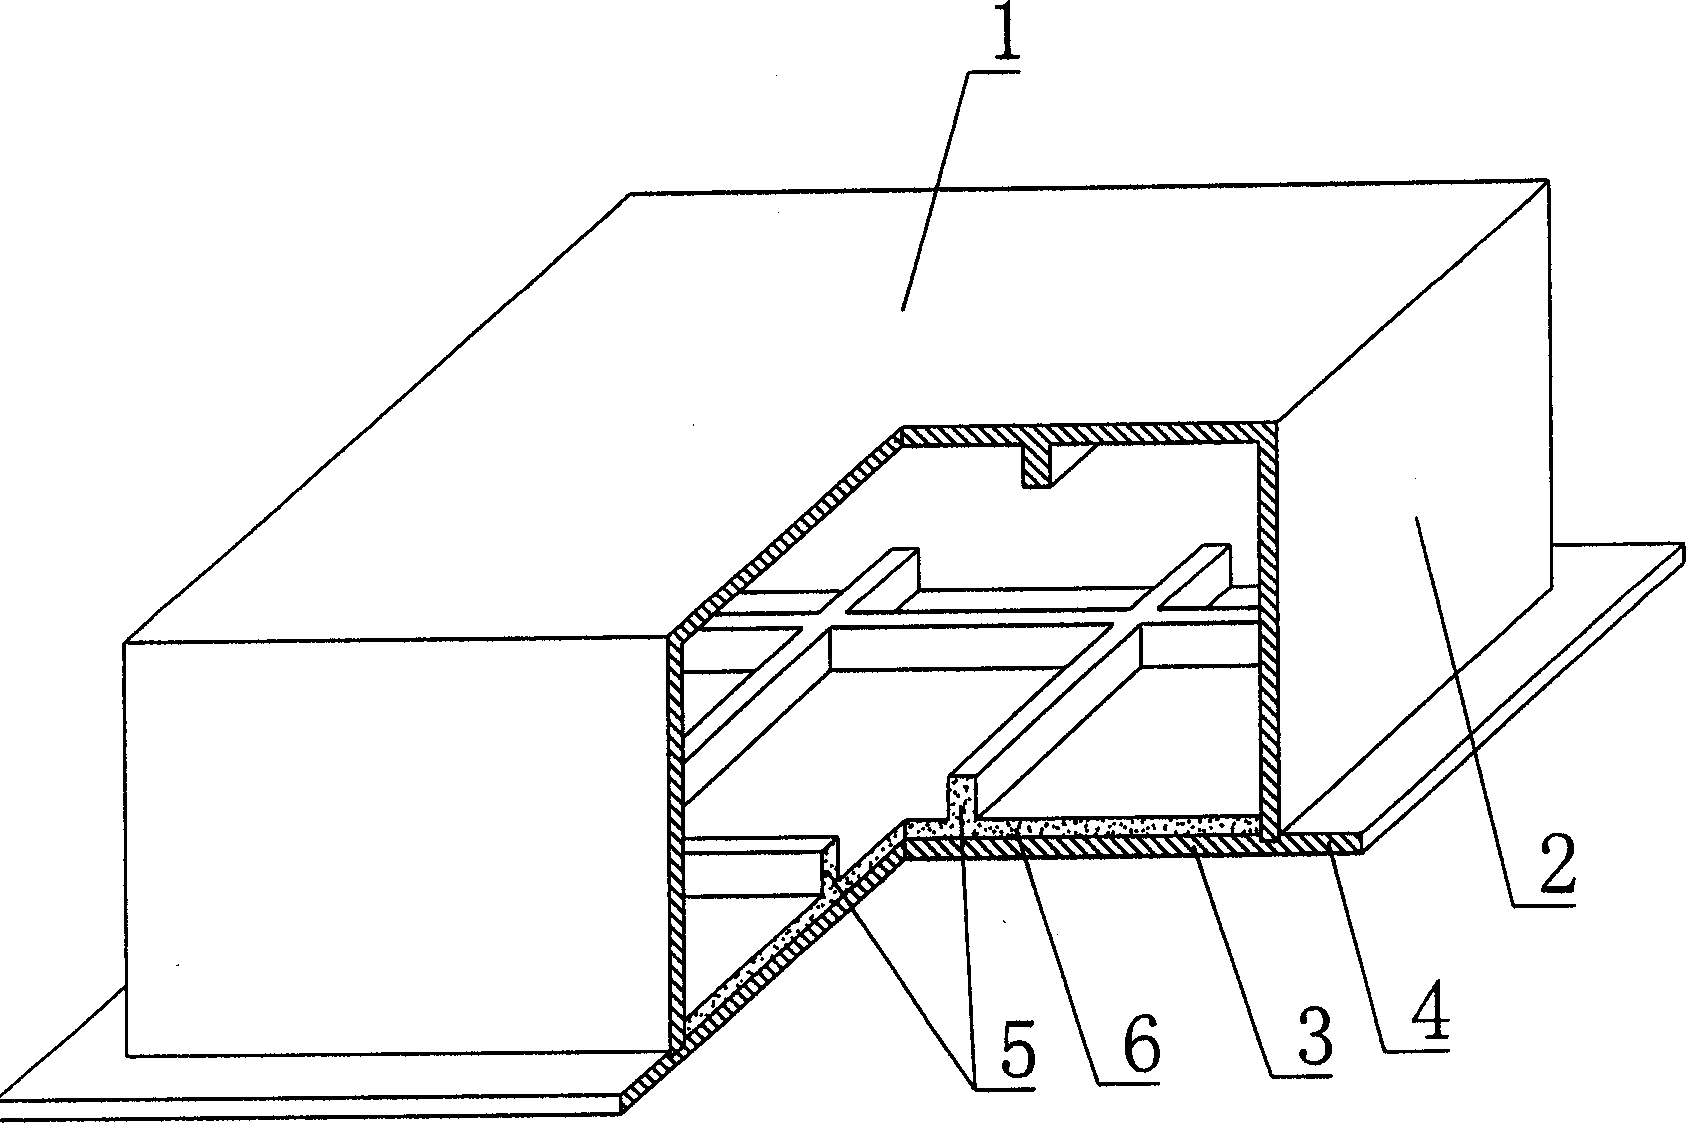 Cast-in-place concrete hollow cavity shuttering member